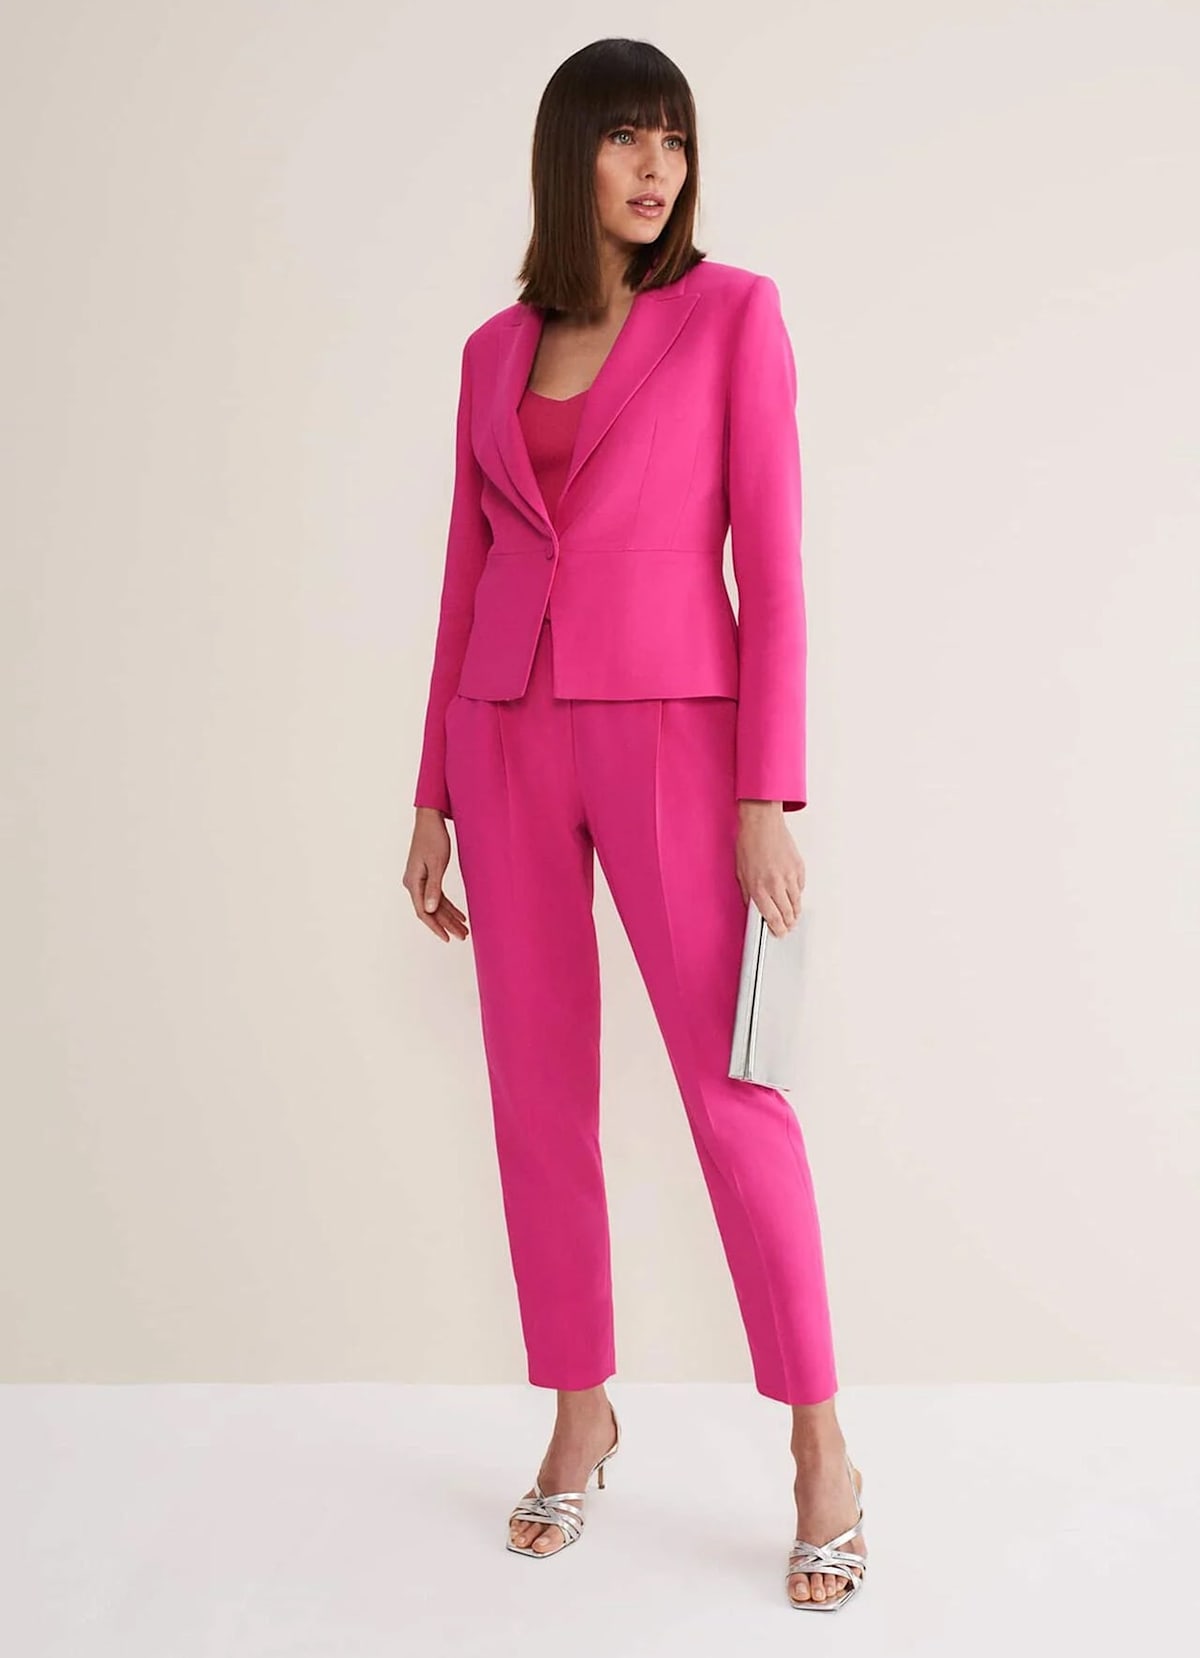 Woman wearing pink suit co-ord with silver heels and silver clutch